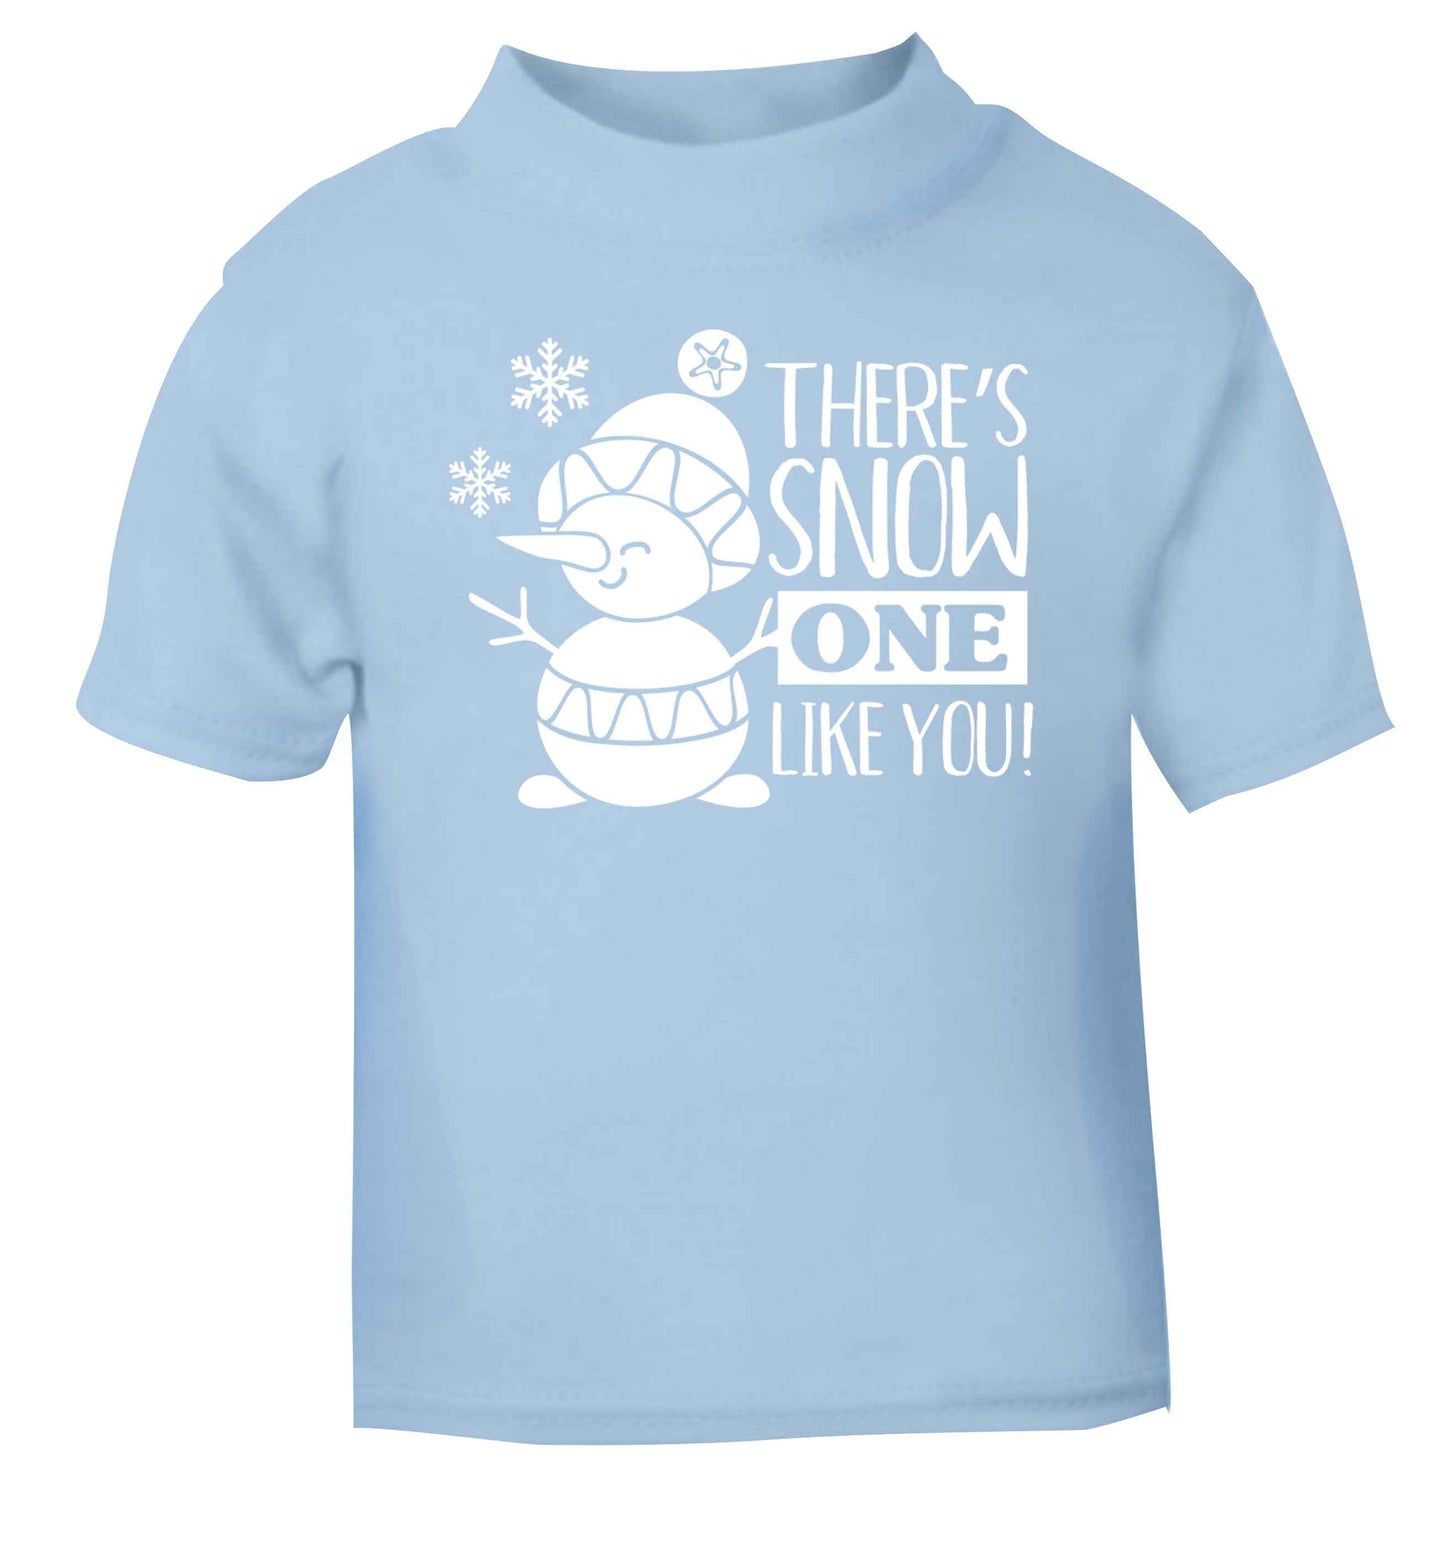 There's snow one like you light blue baby toddler Tshirt 2 Years